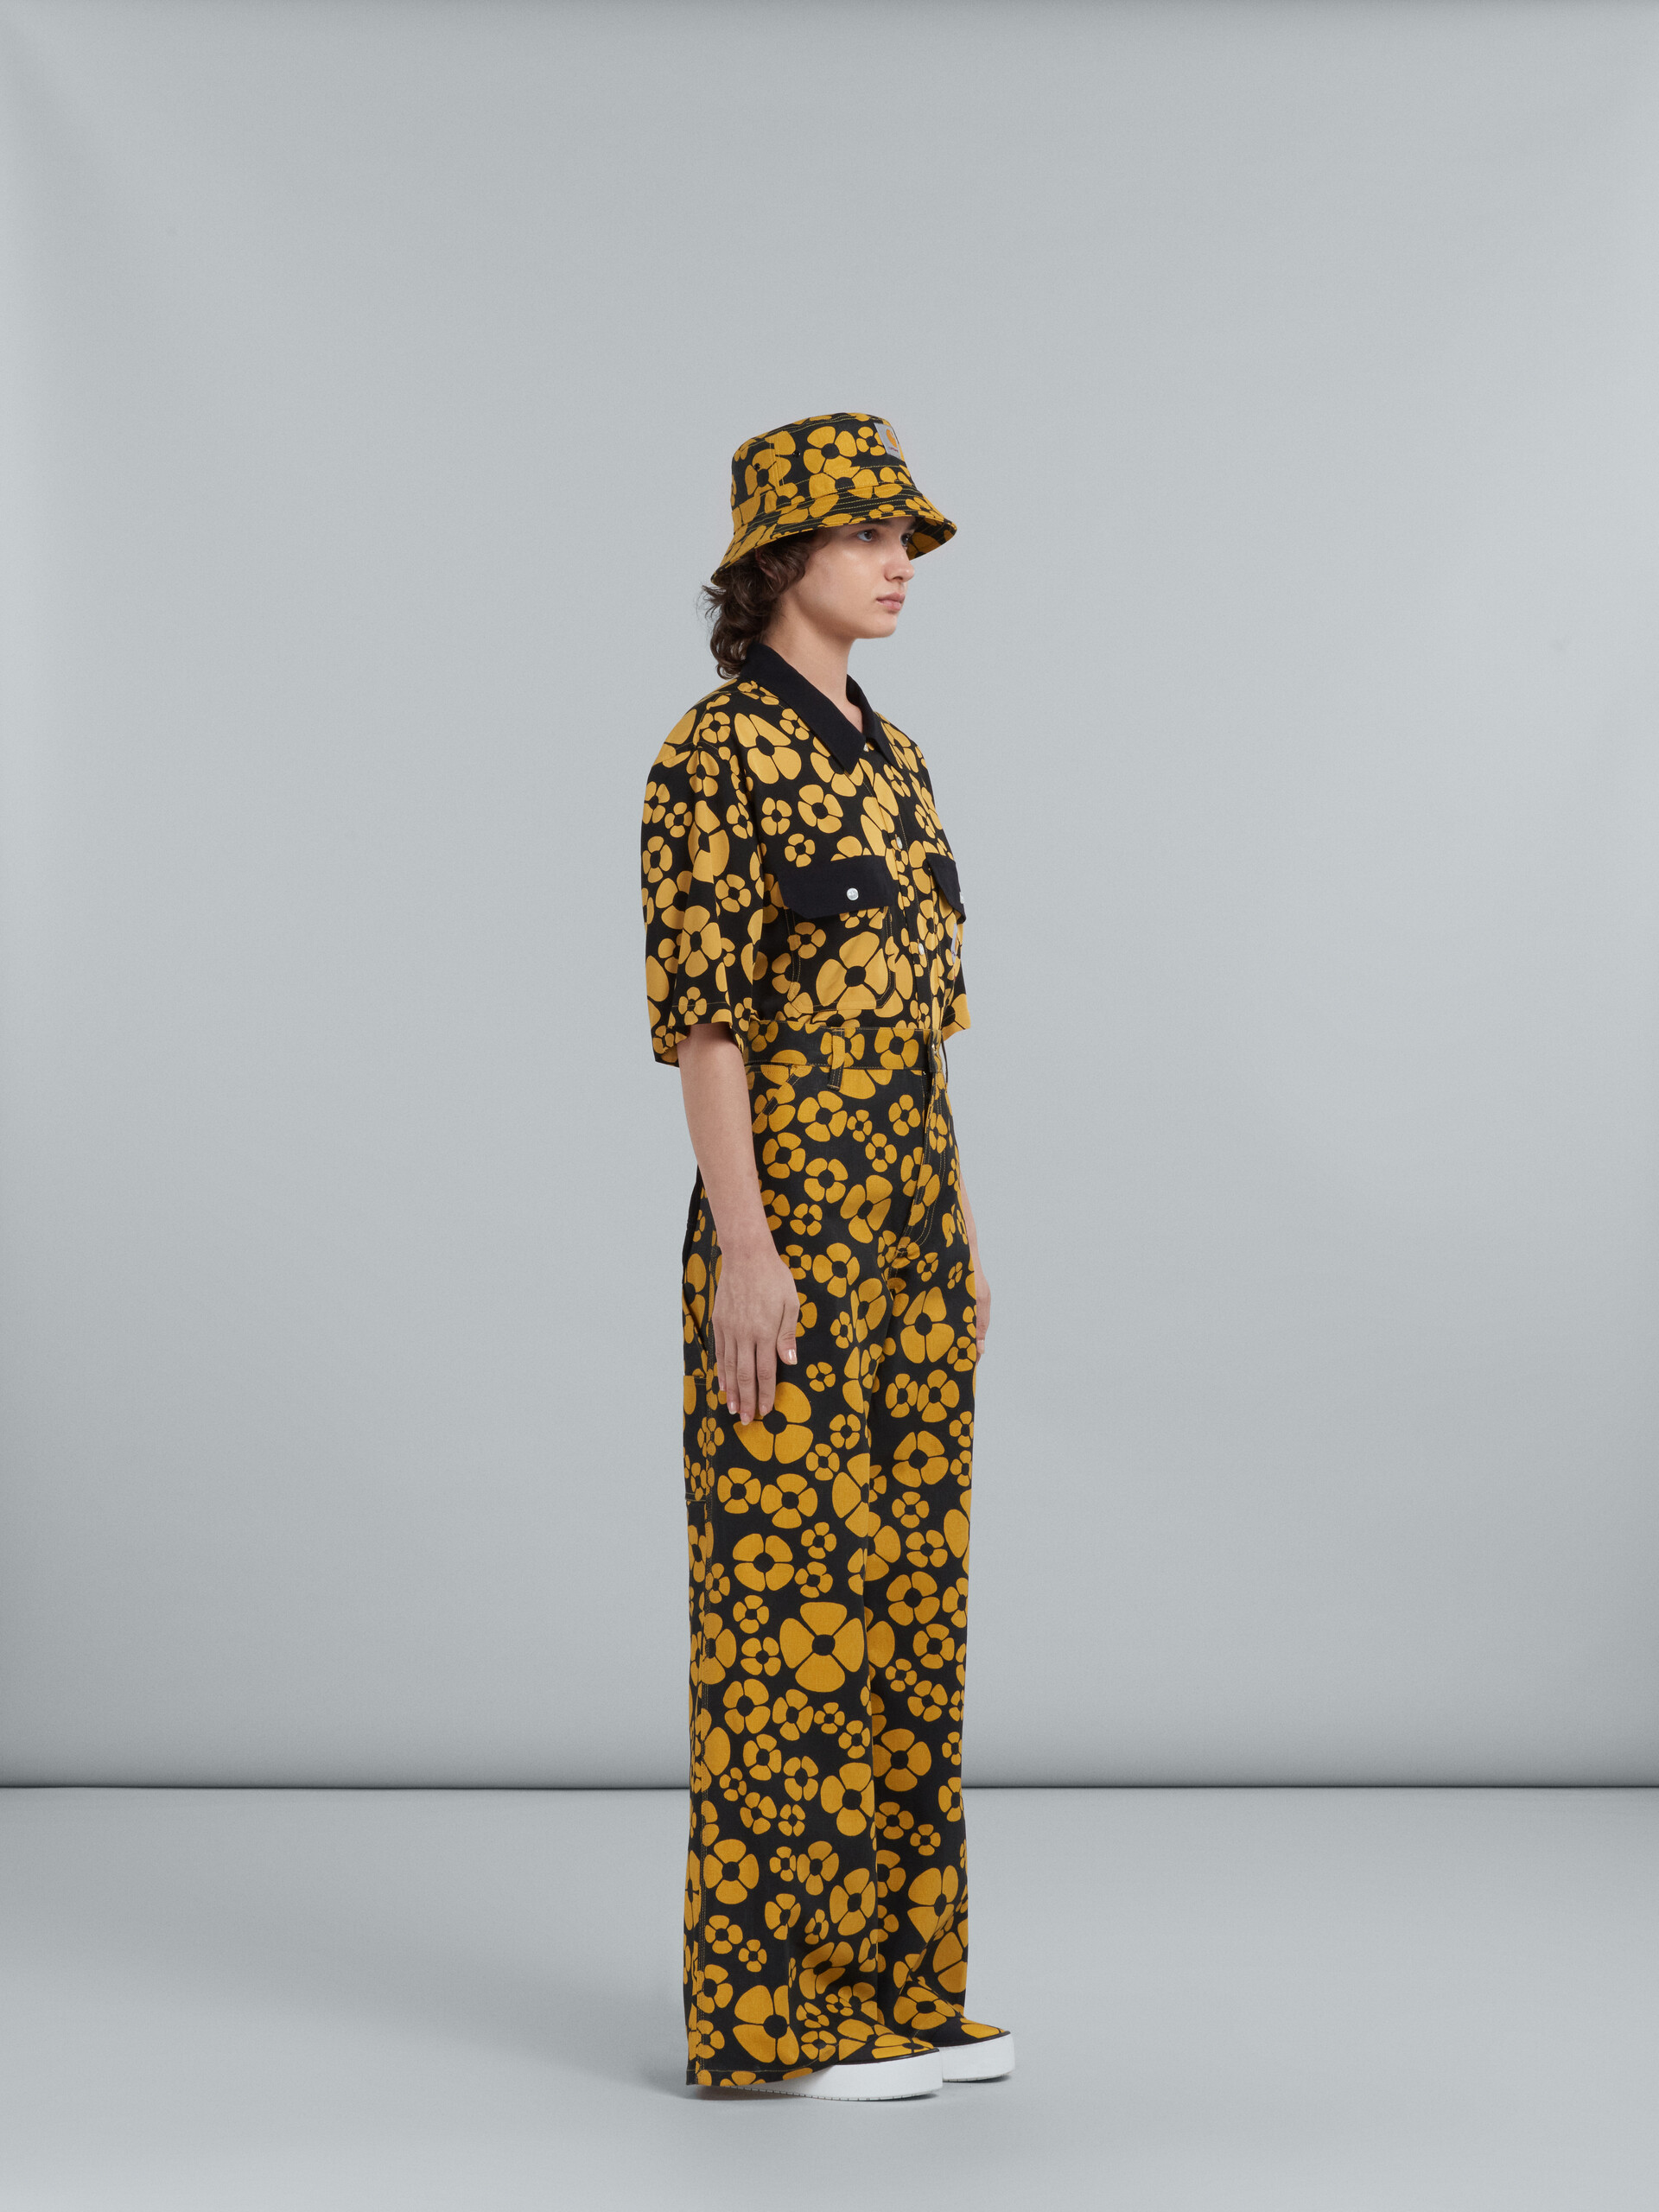 MARNI x CARHARTT WIP - yellow floral trousers - Pants - Image 5